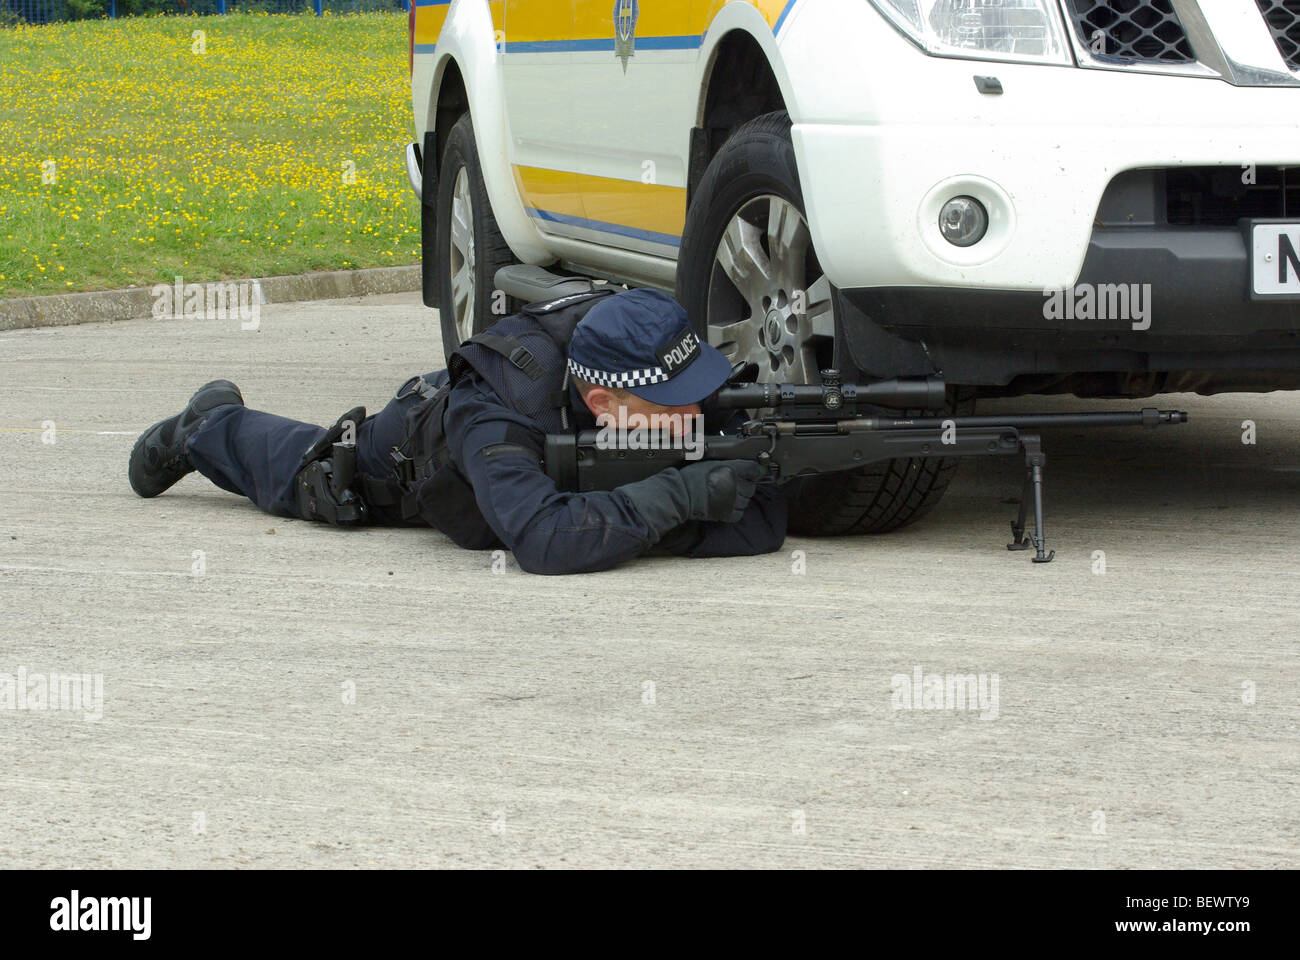 Police sniper using vehicle for cover Stock Photo